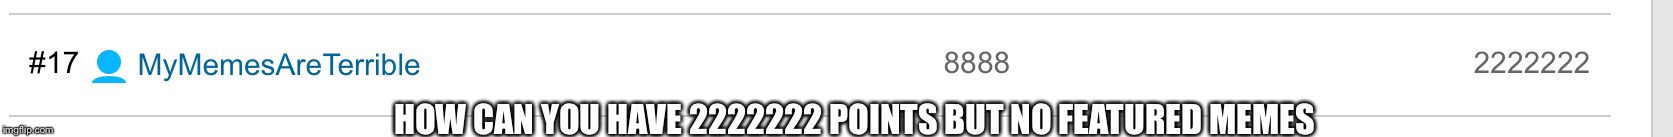 God? Glitch? Hack? | HOW CAN YOU HAVE 2222222 POINTS BUT NO FEATURED MEMES | image tagged in 2222222 | made w/ Imgflip meme maker